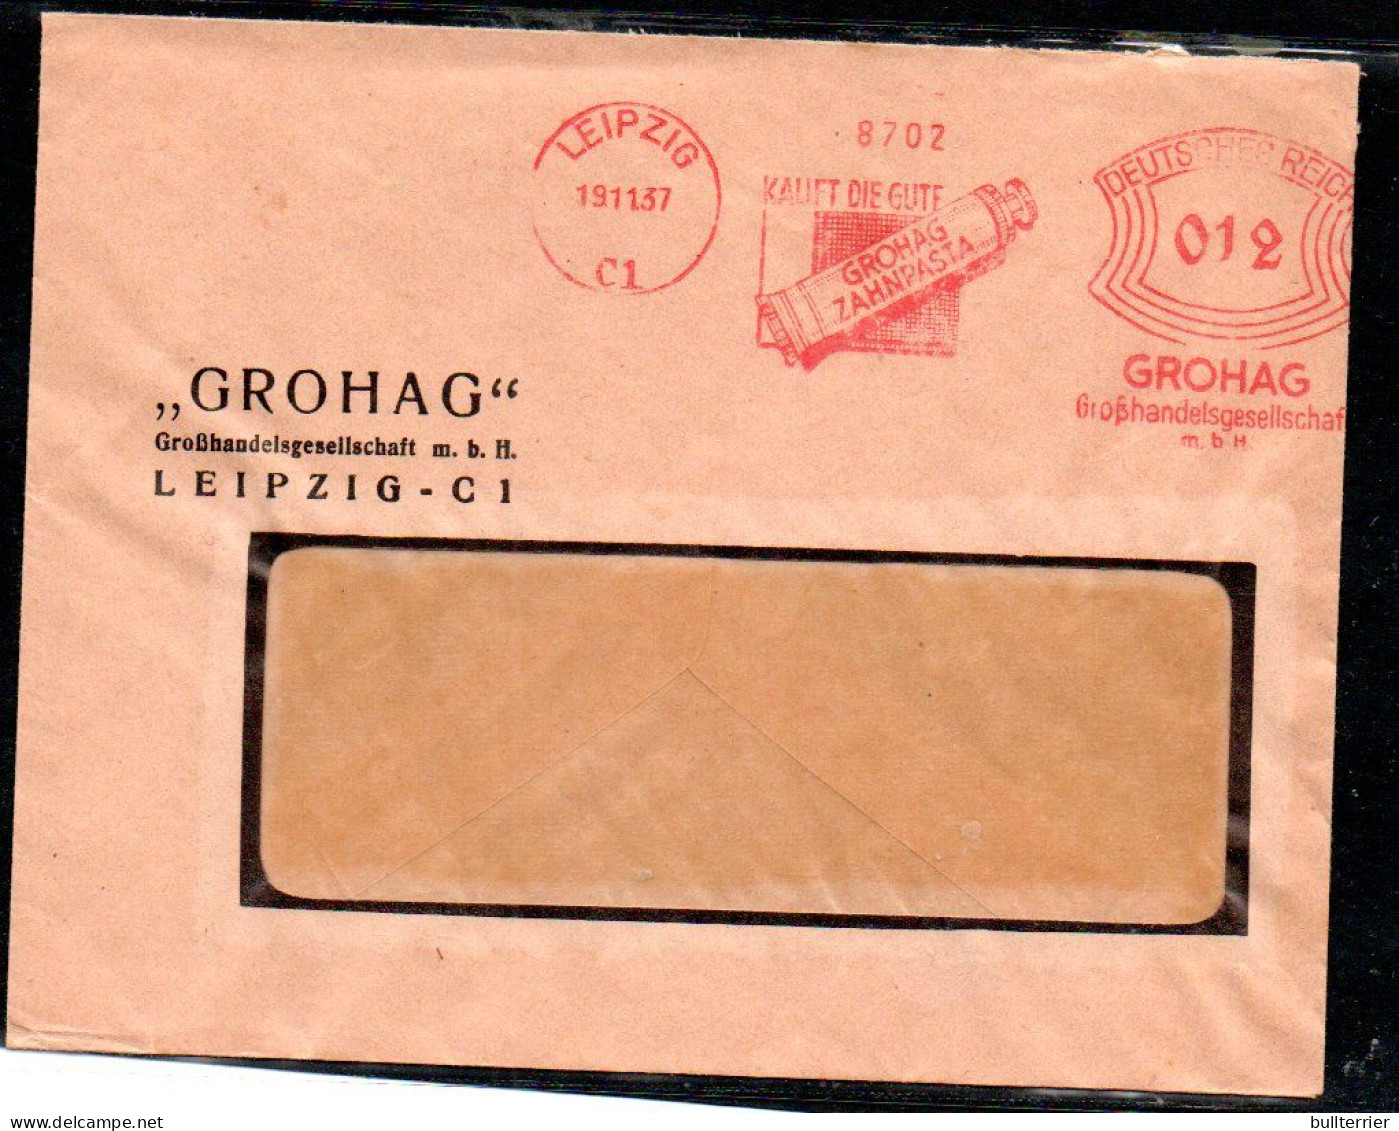 DENISTRY -  GERMANY - 1937  - COVER  FROM LEIPZIG  WITH GROHAG  TOOTHPASTE SLOGAN POSTMARK - Medizin